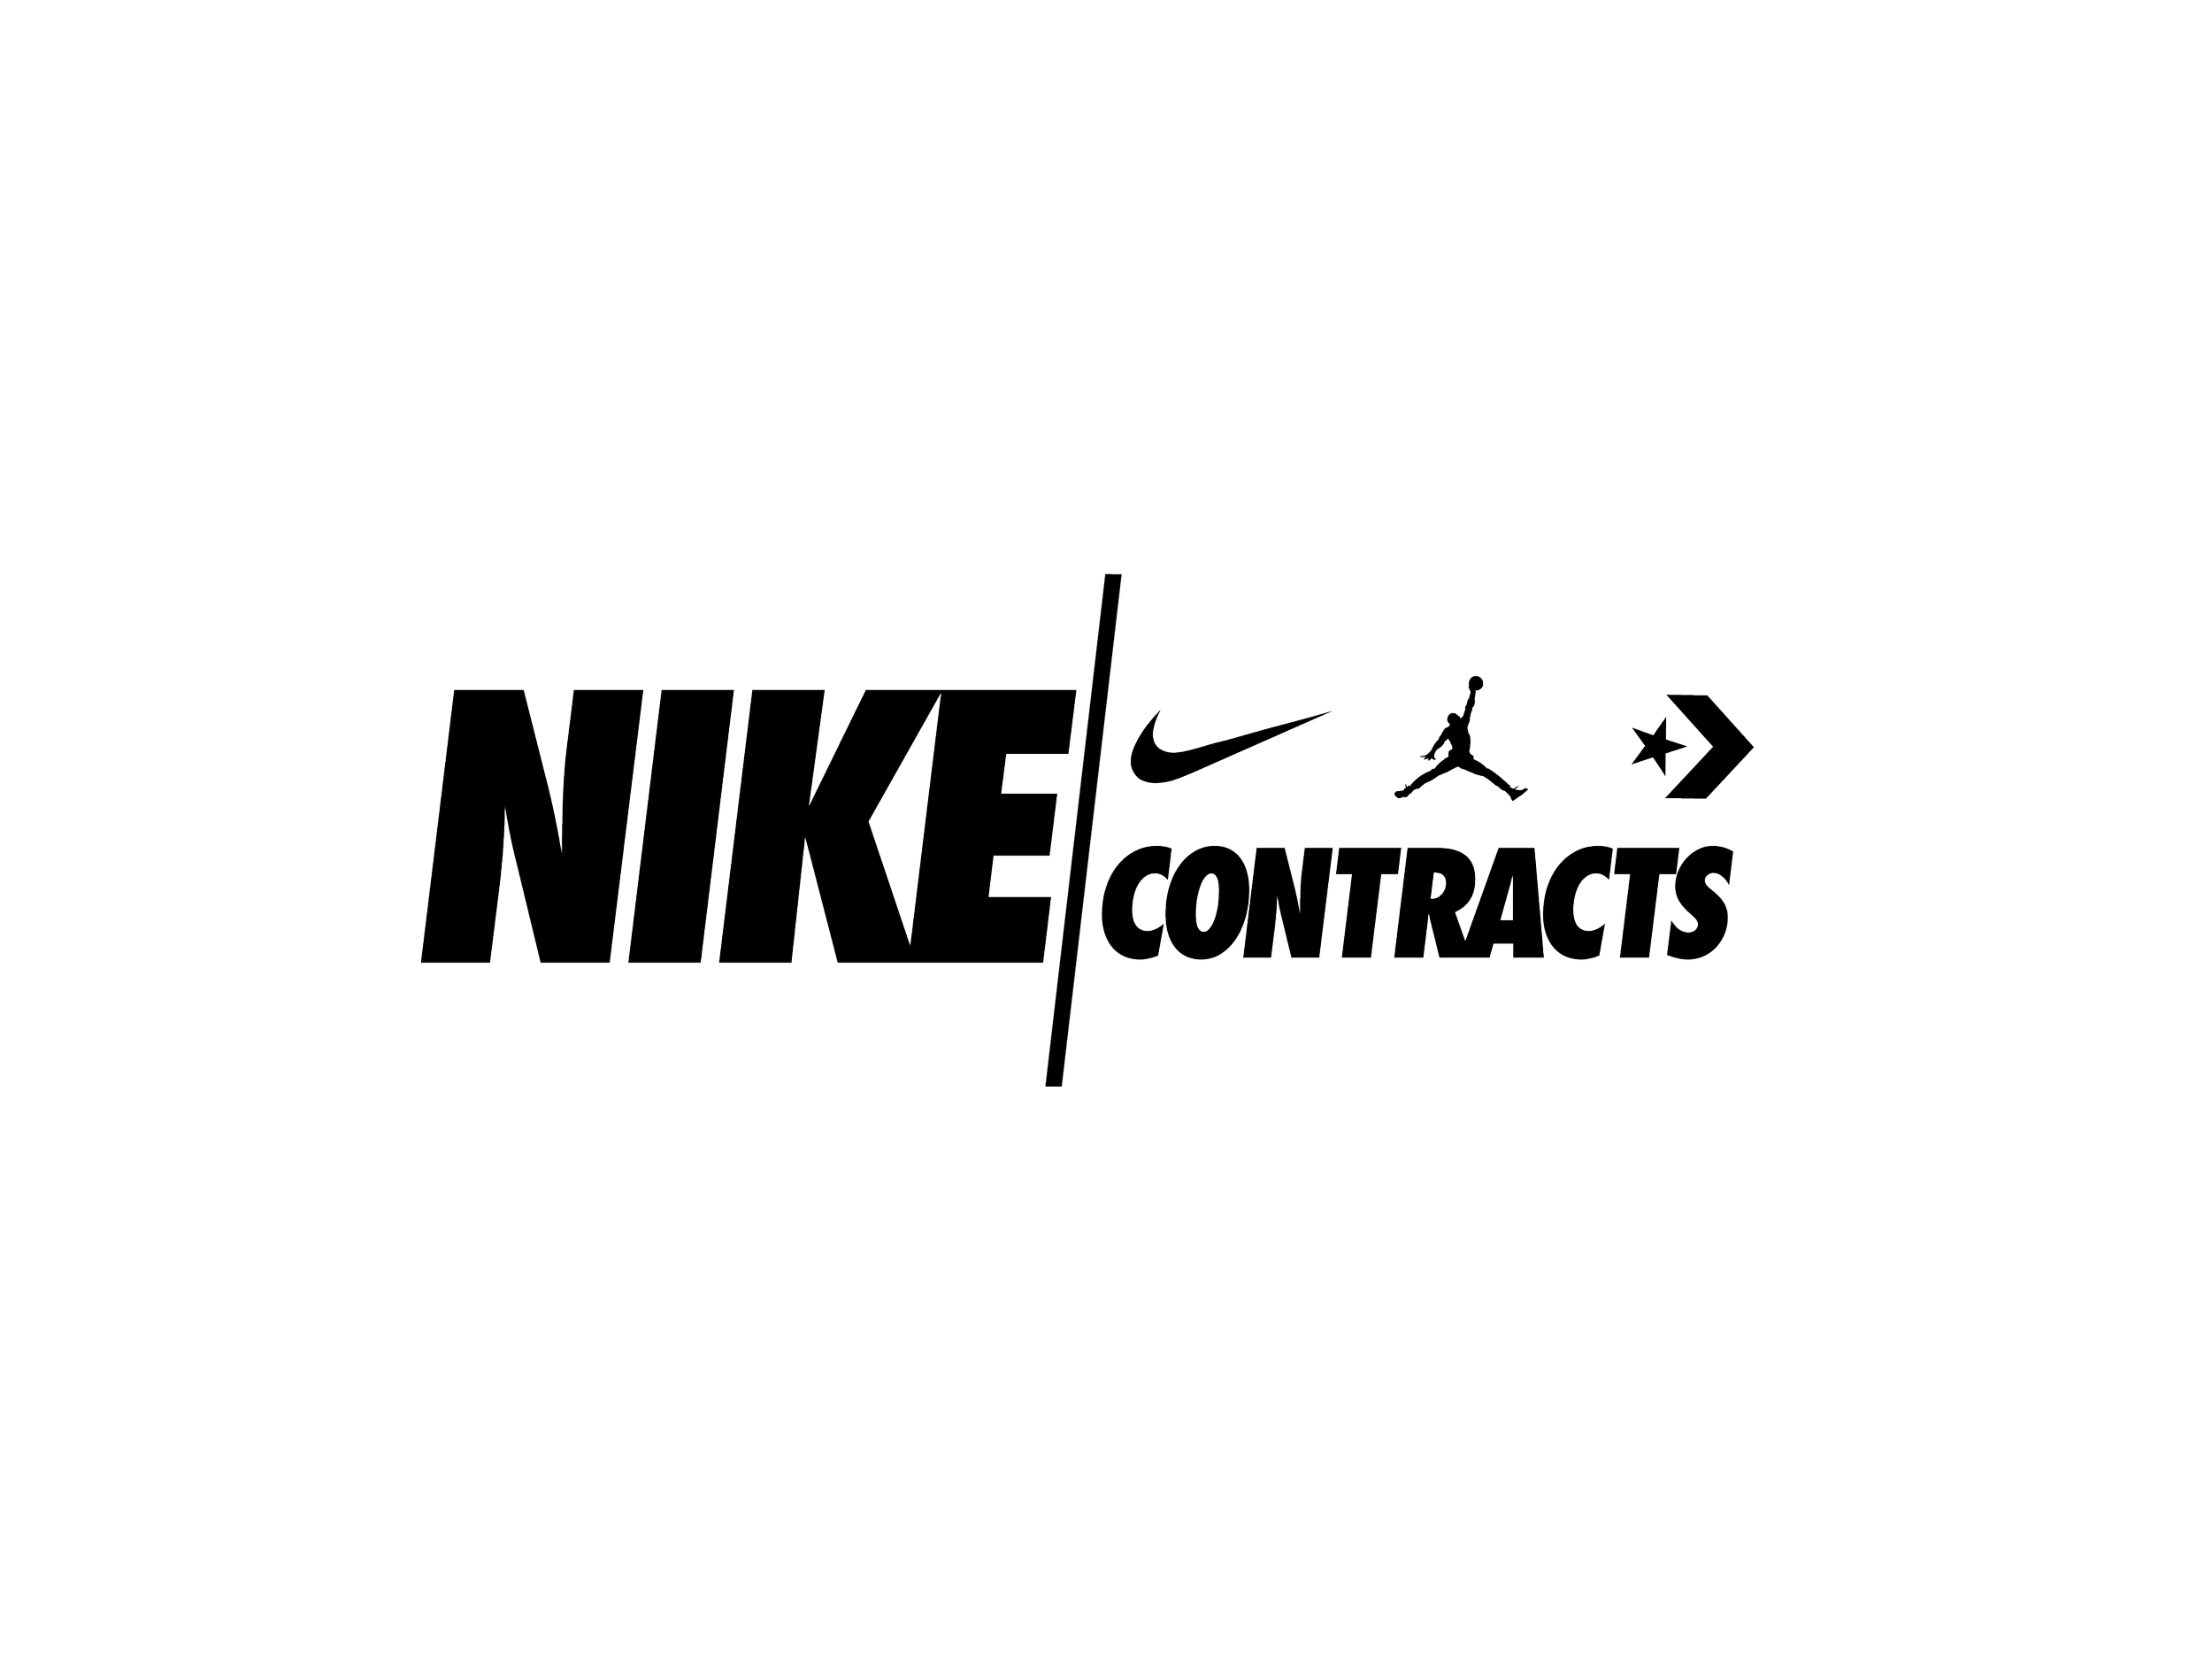 NIKEContracts_WordMark_r1-14.png